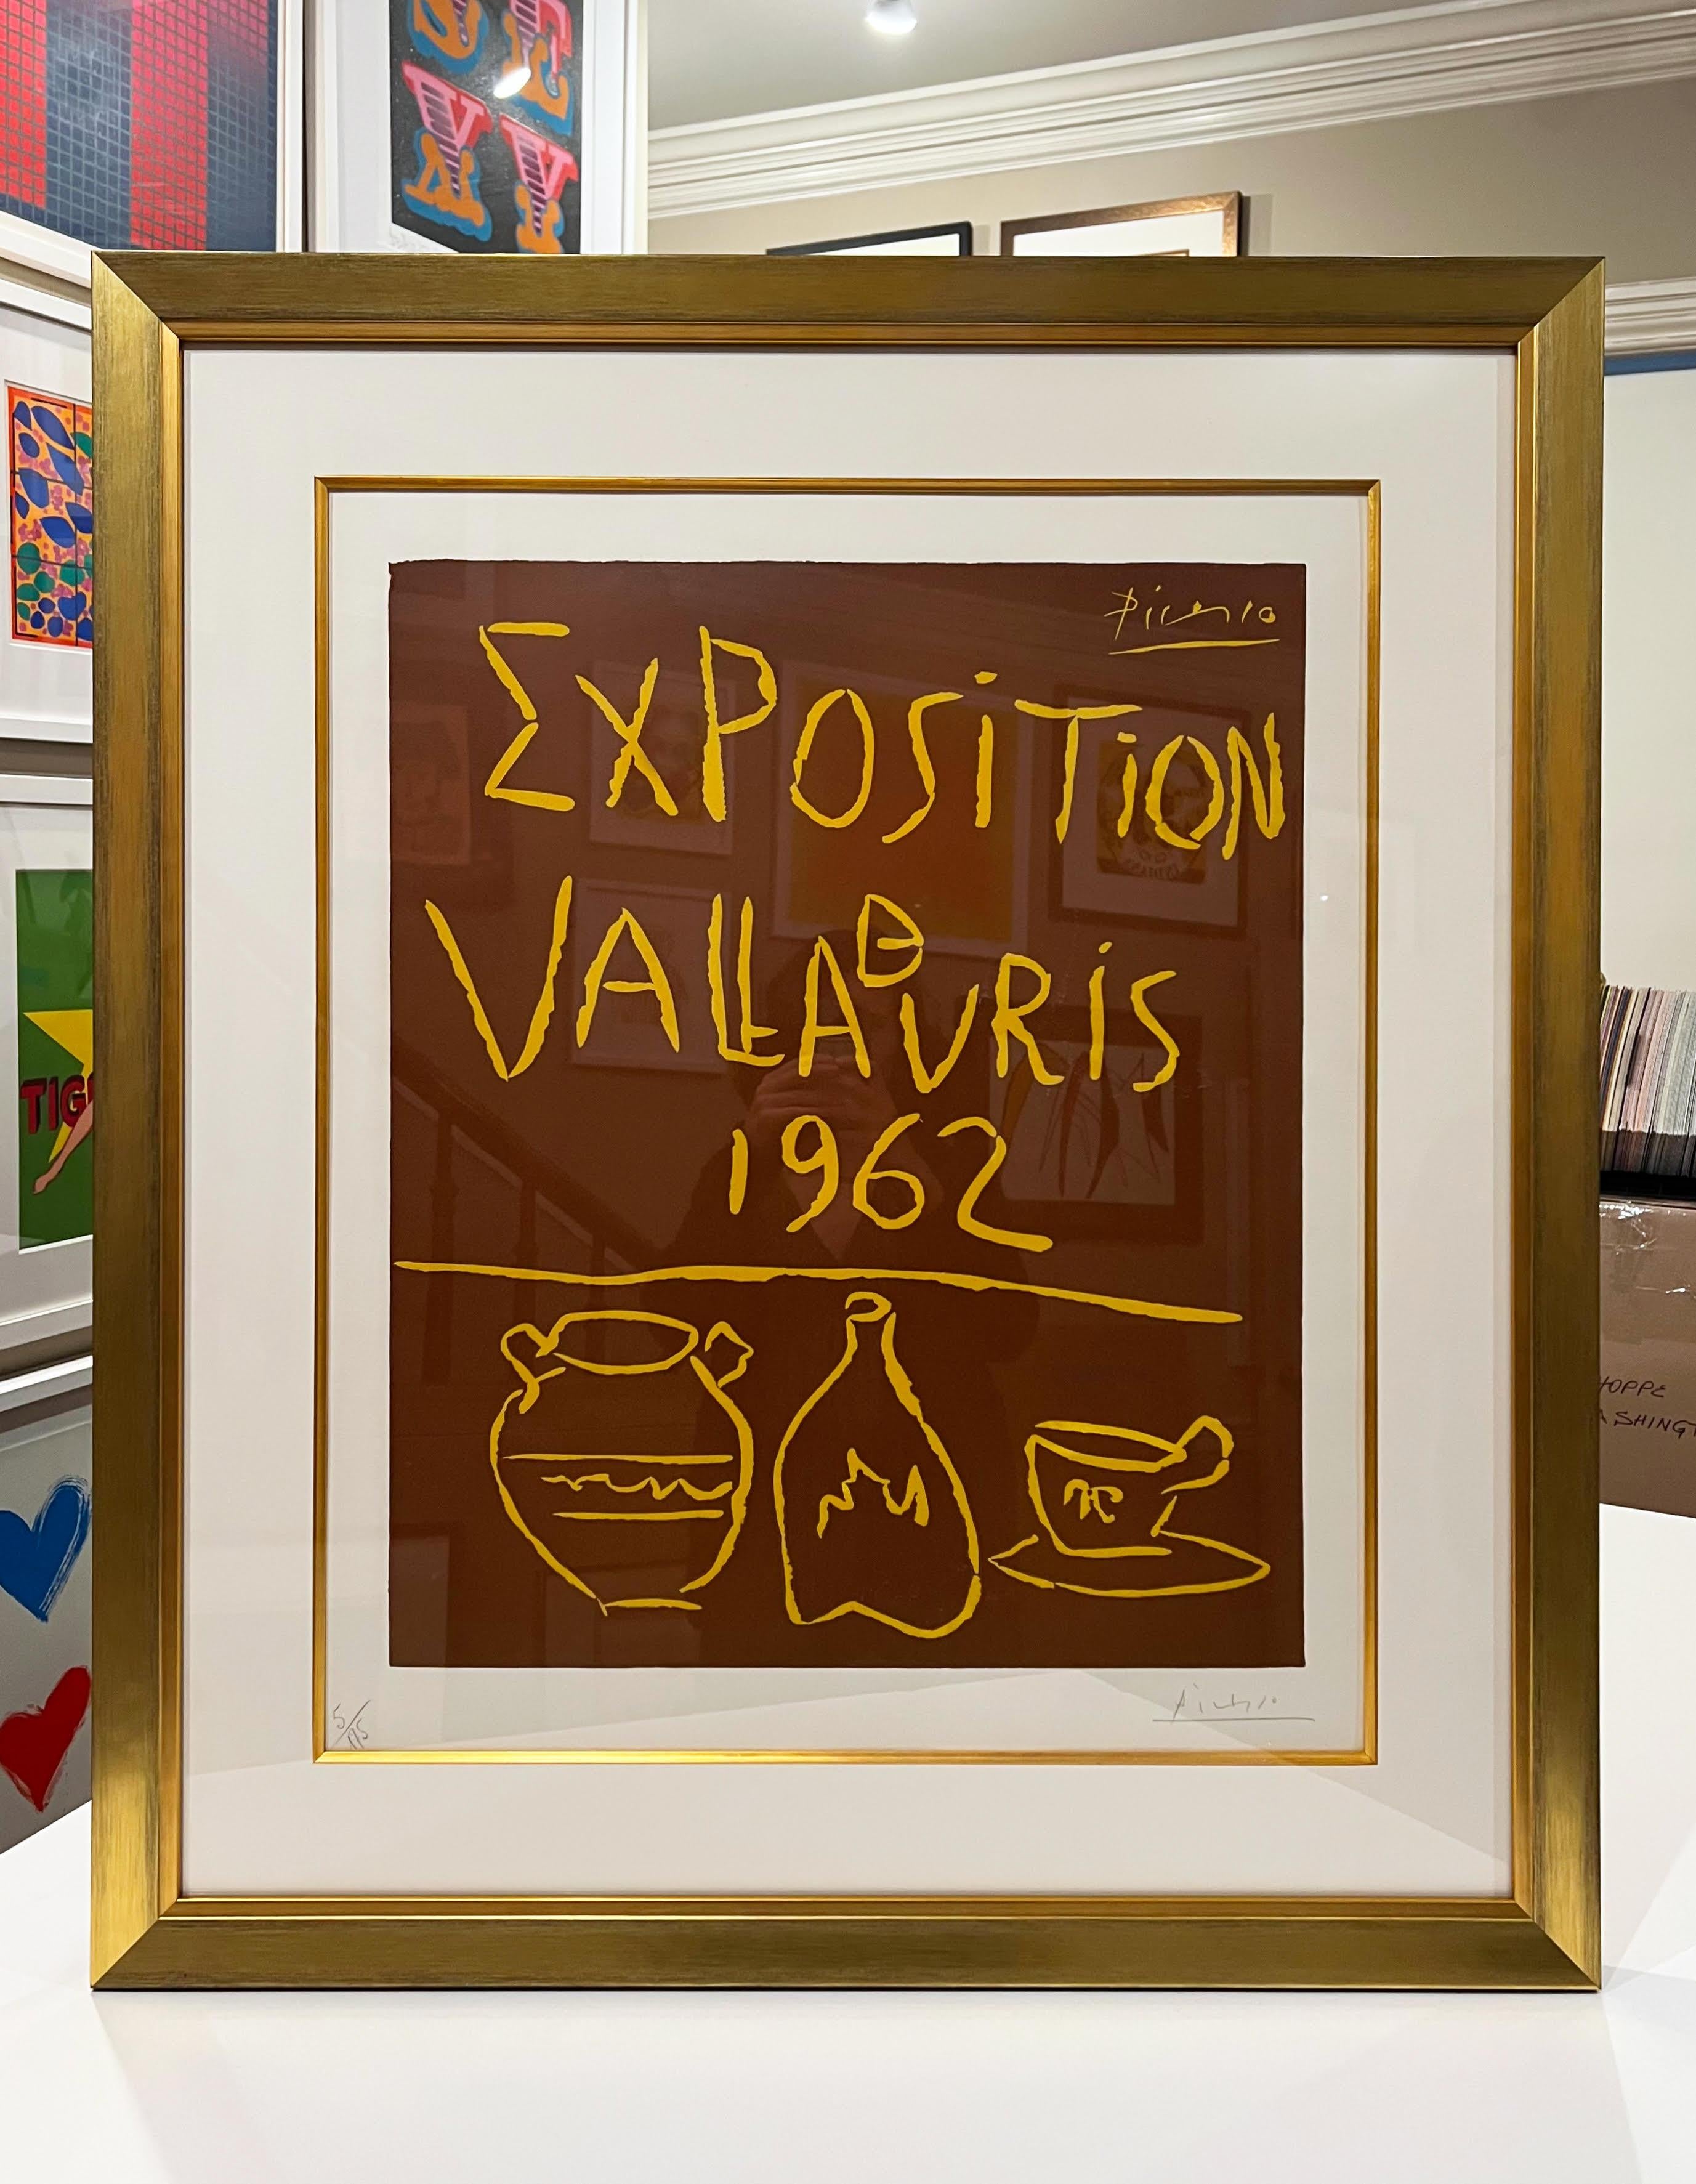 Exposition Vallauris 1962 - Cubist Print by Pablo Picasso